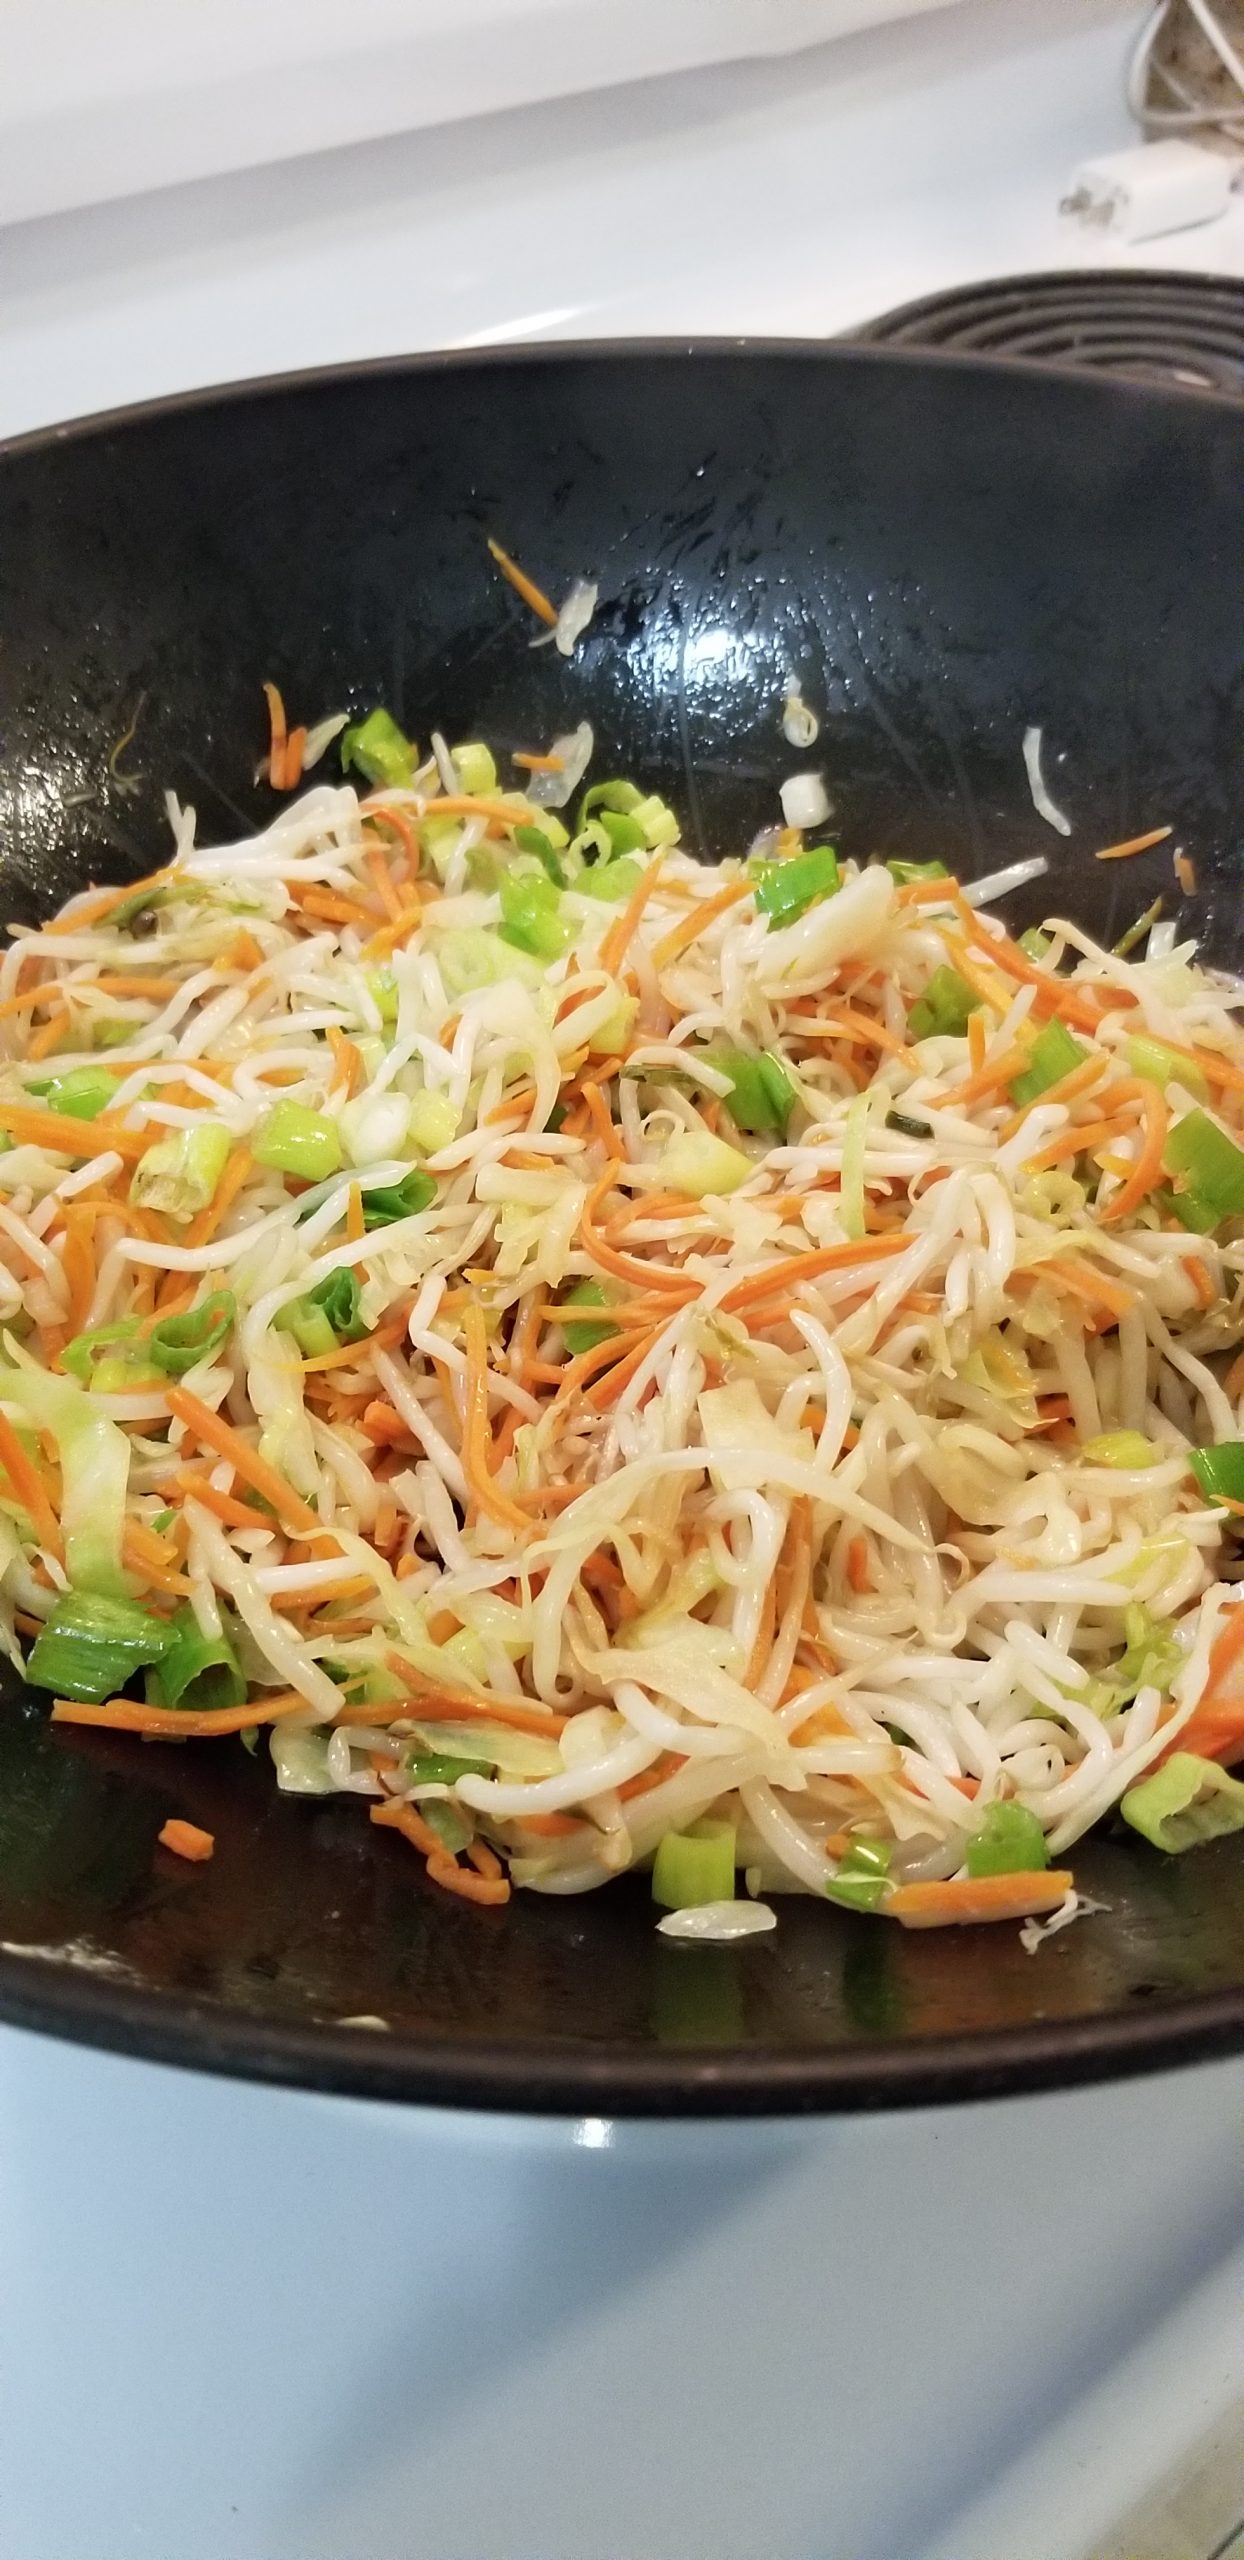 Mung bean sprouts, shredded carrots, shredded cabbage, and green onions cooking in a wok